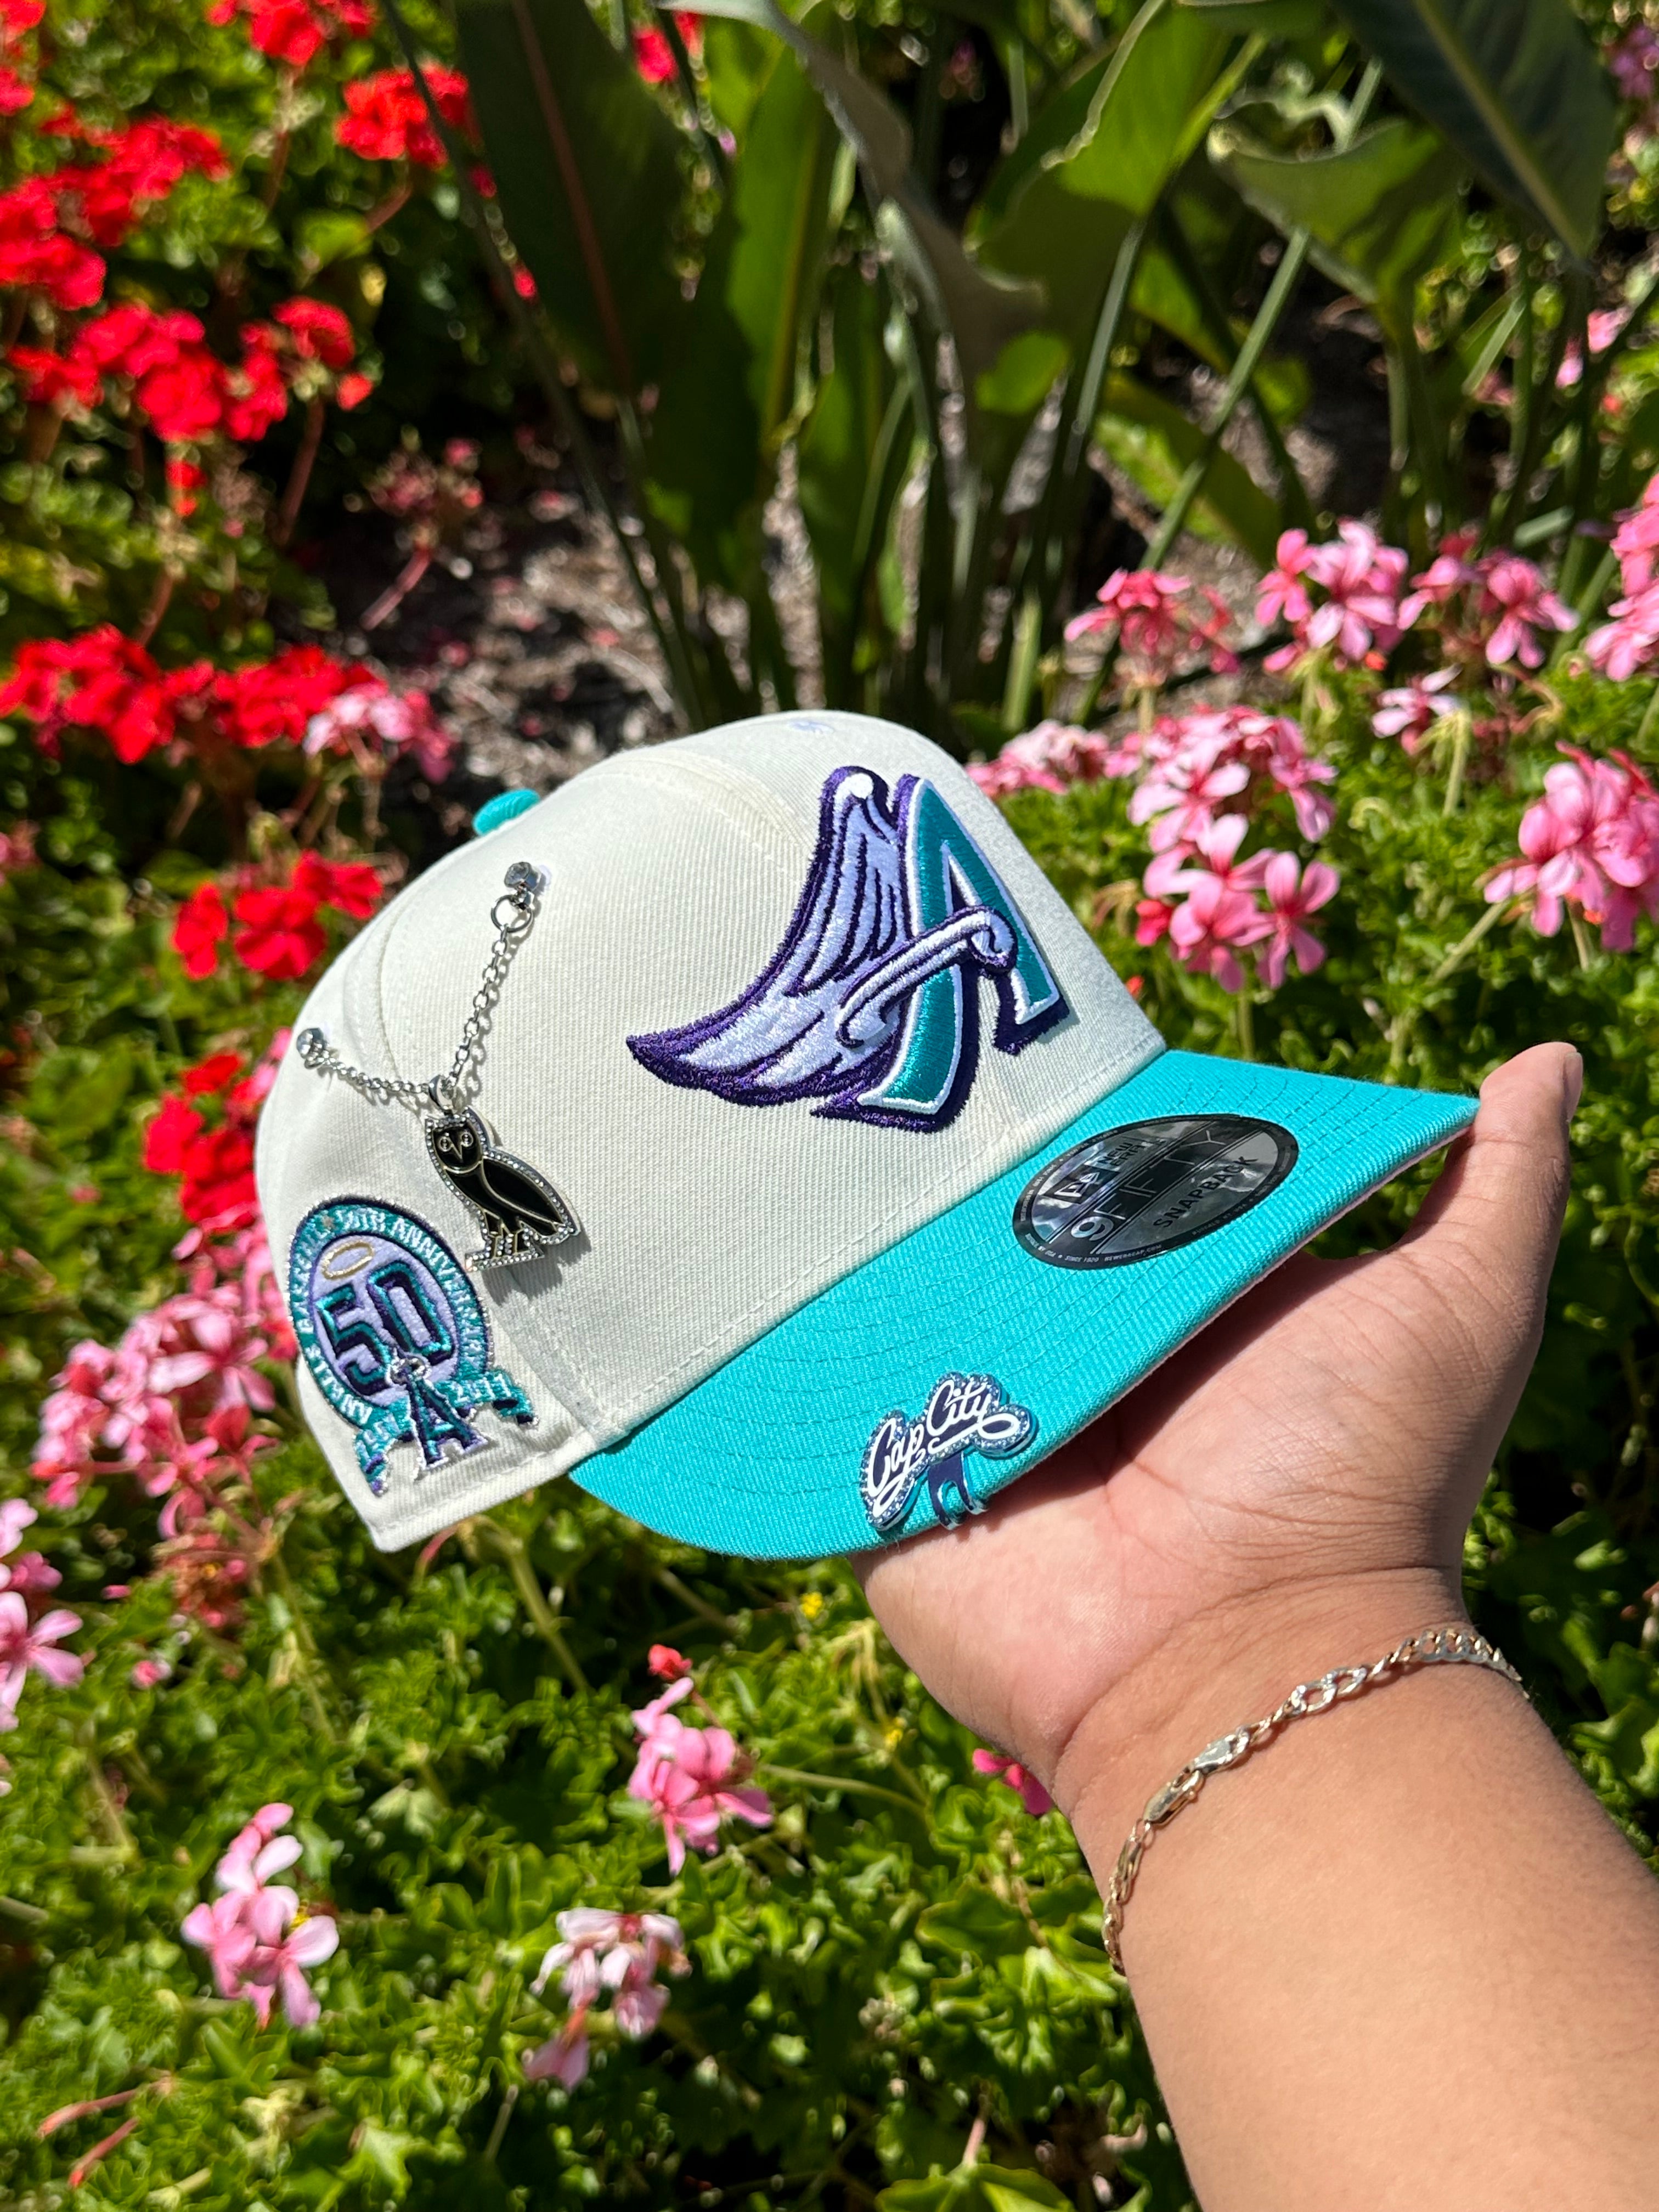 NEW ERA 9FIFTY CHROME WHITE/TURQUOISE ANAHEIM ANGELS SNAPBACK W/ 50TH ANNIVERSARY SIDE PATCH